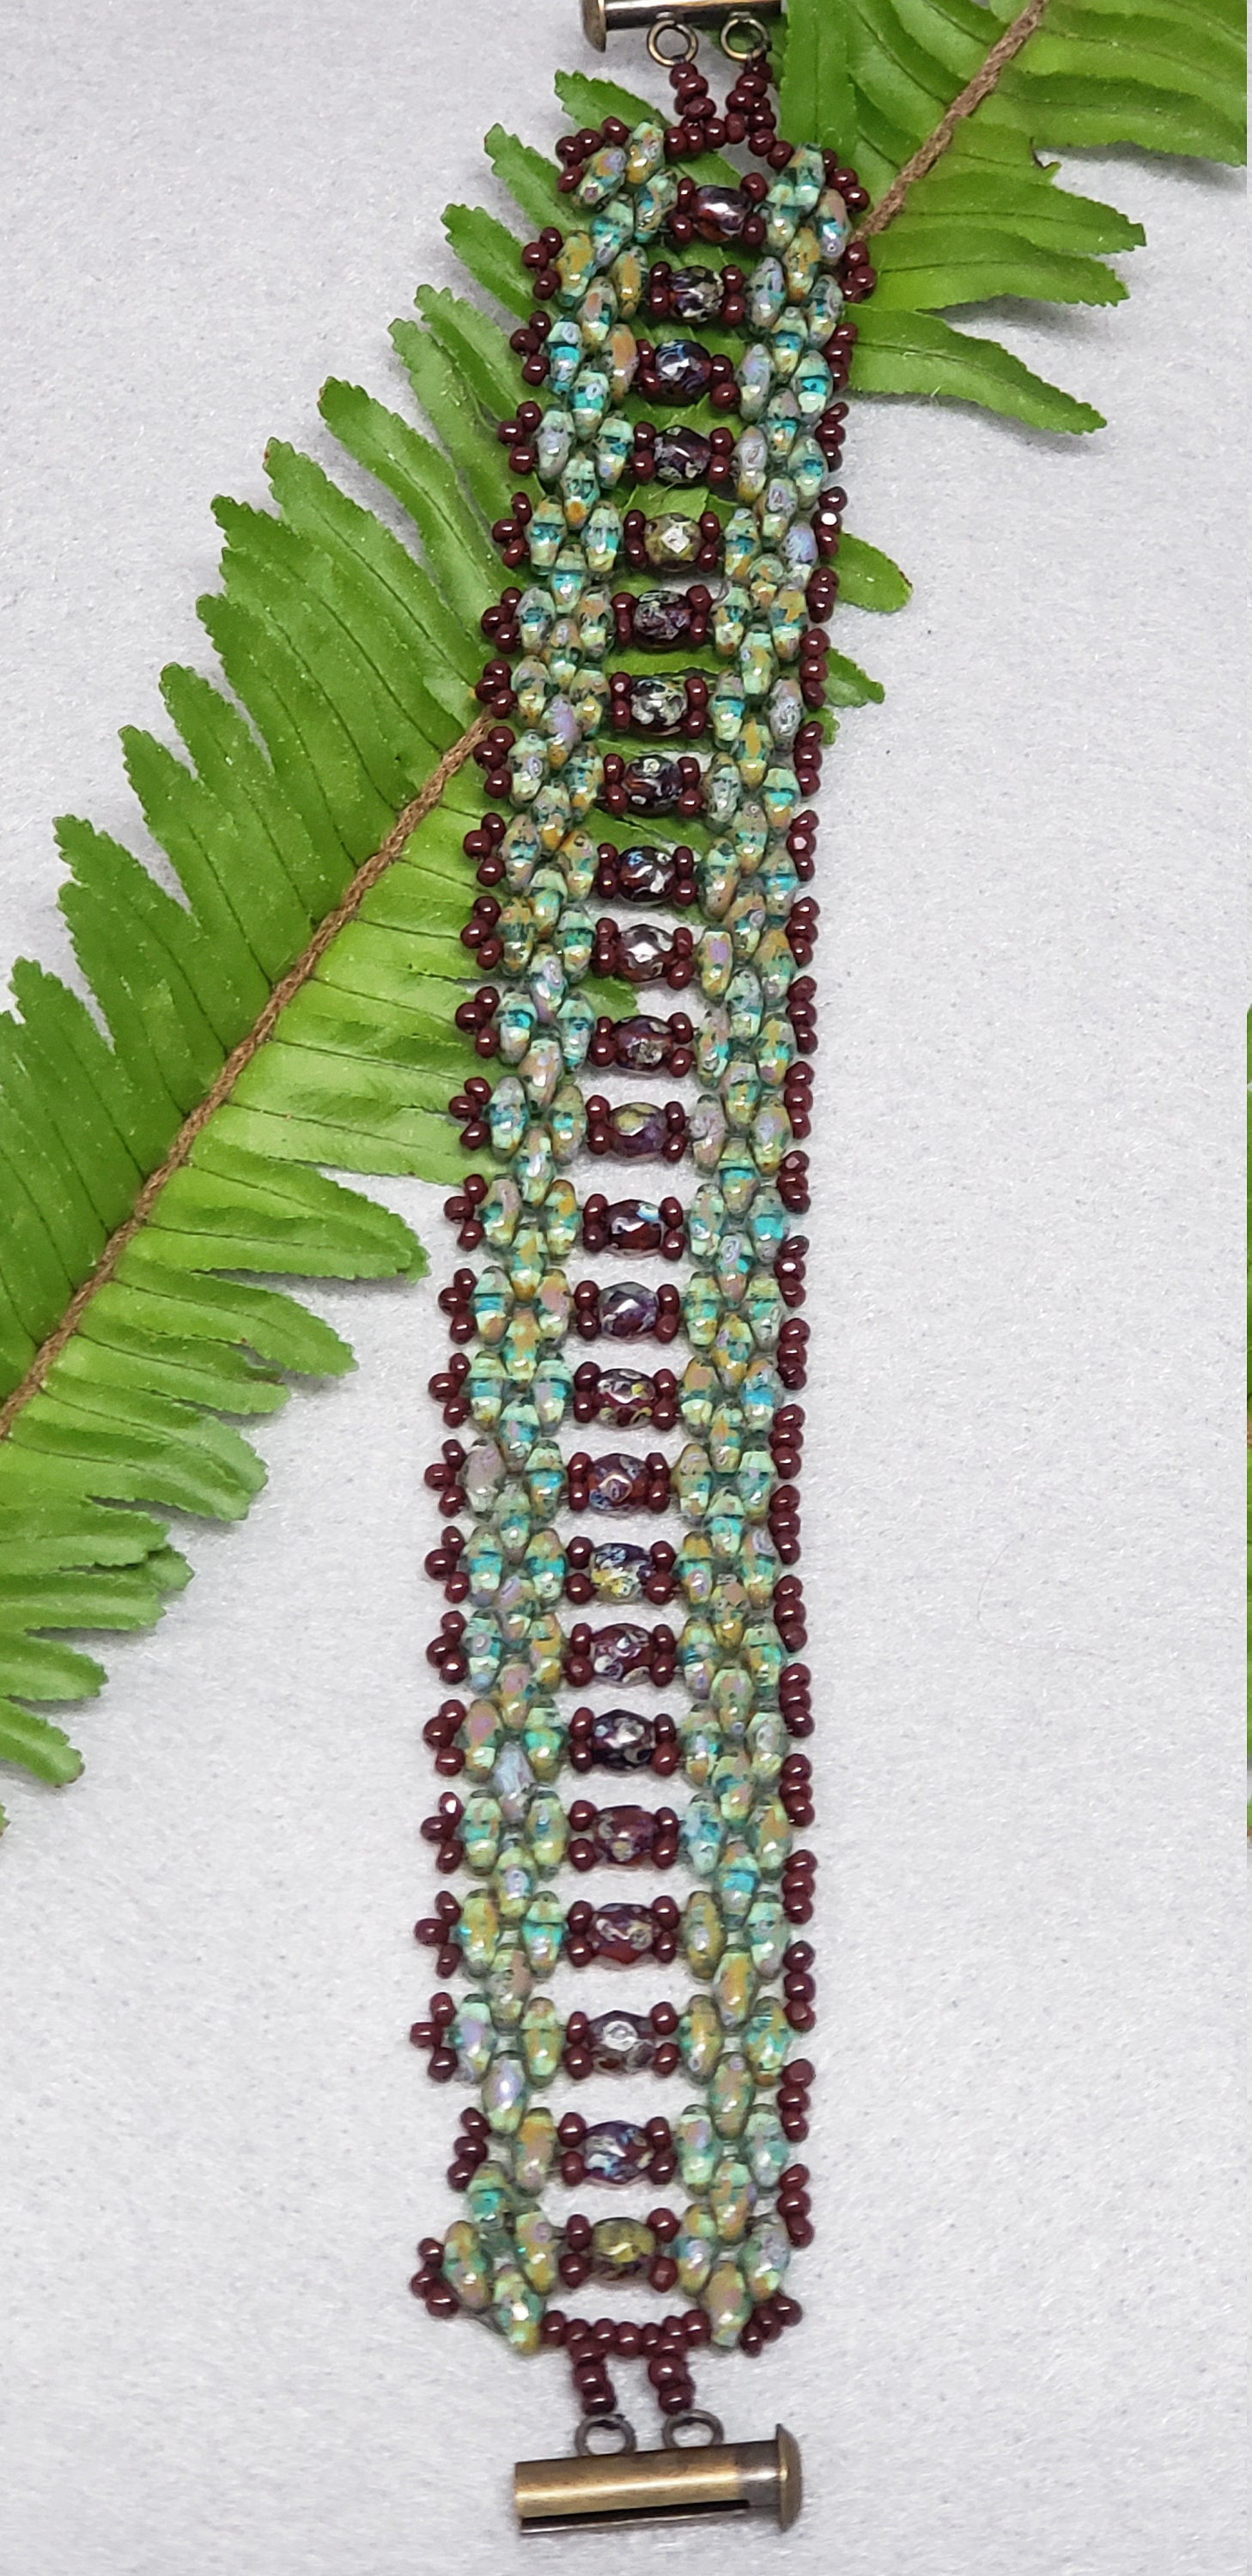 Greenish Turquoise and Maroon Bracelet with Center Accent